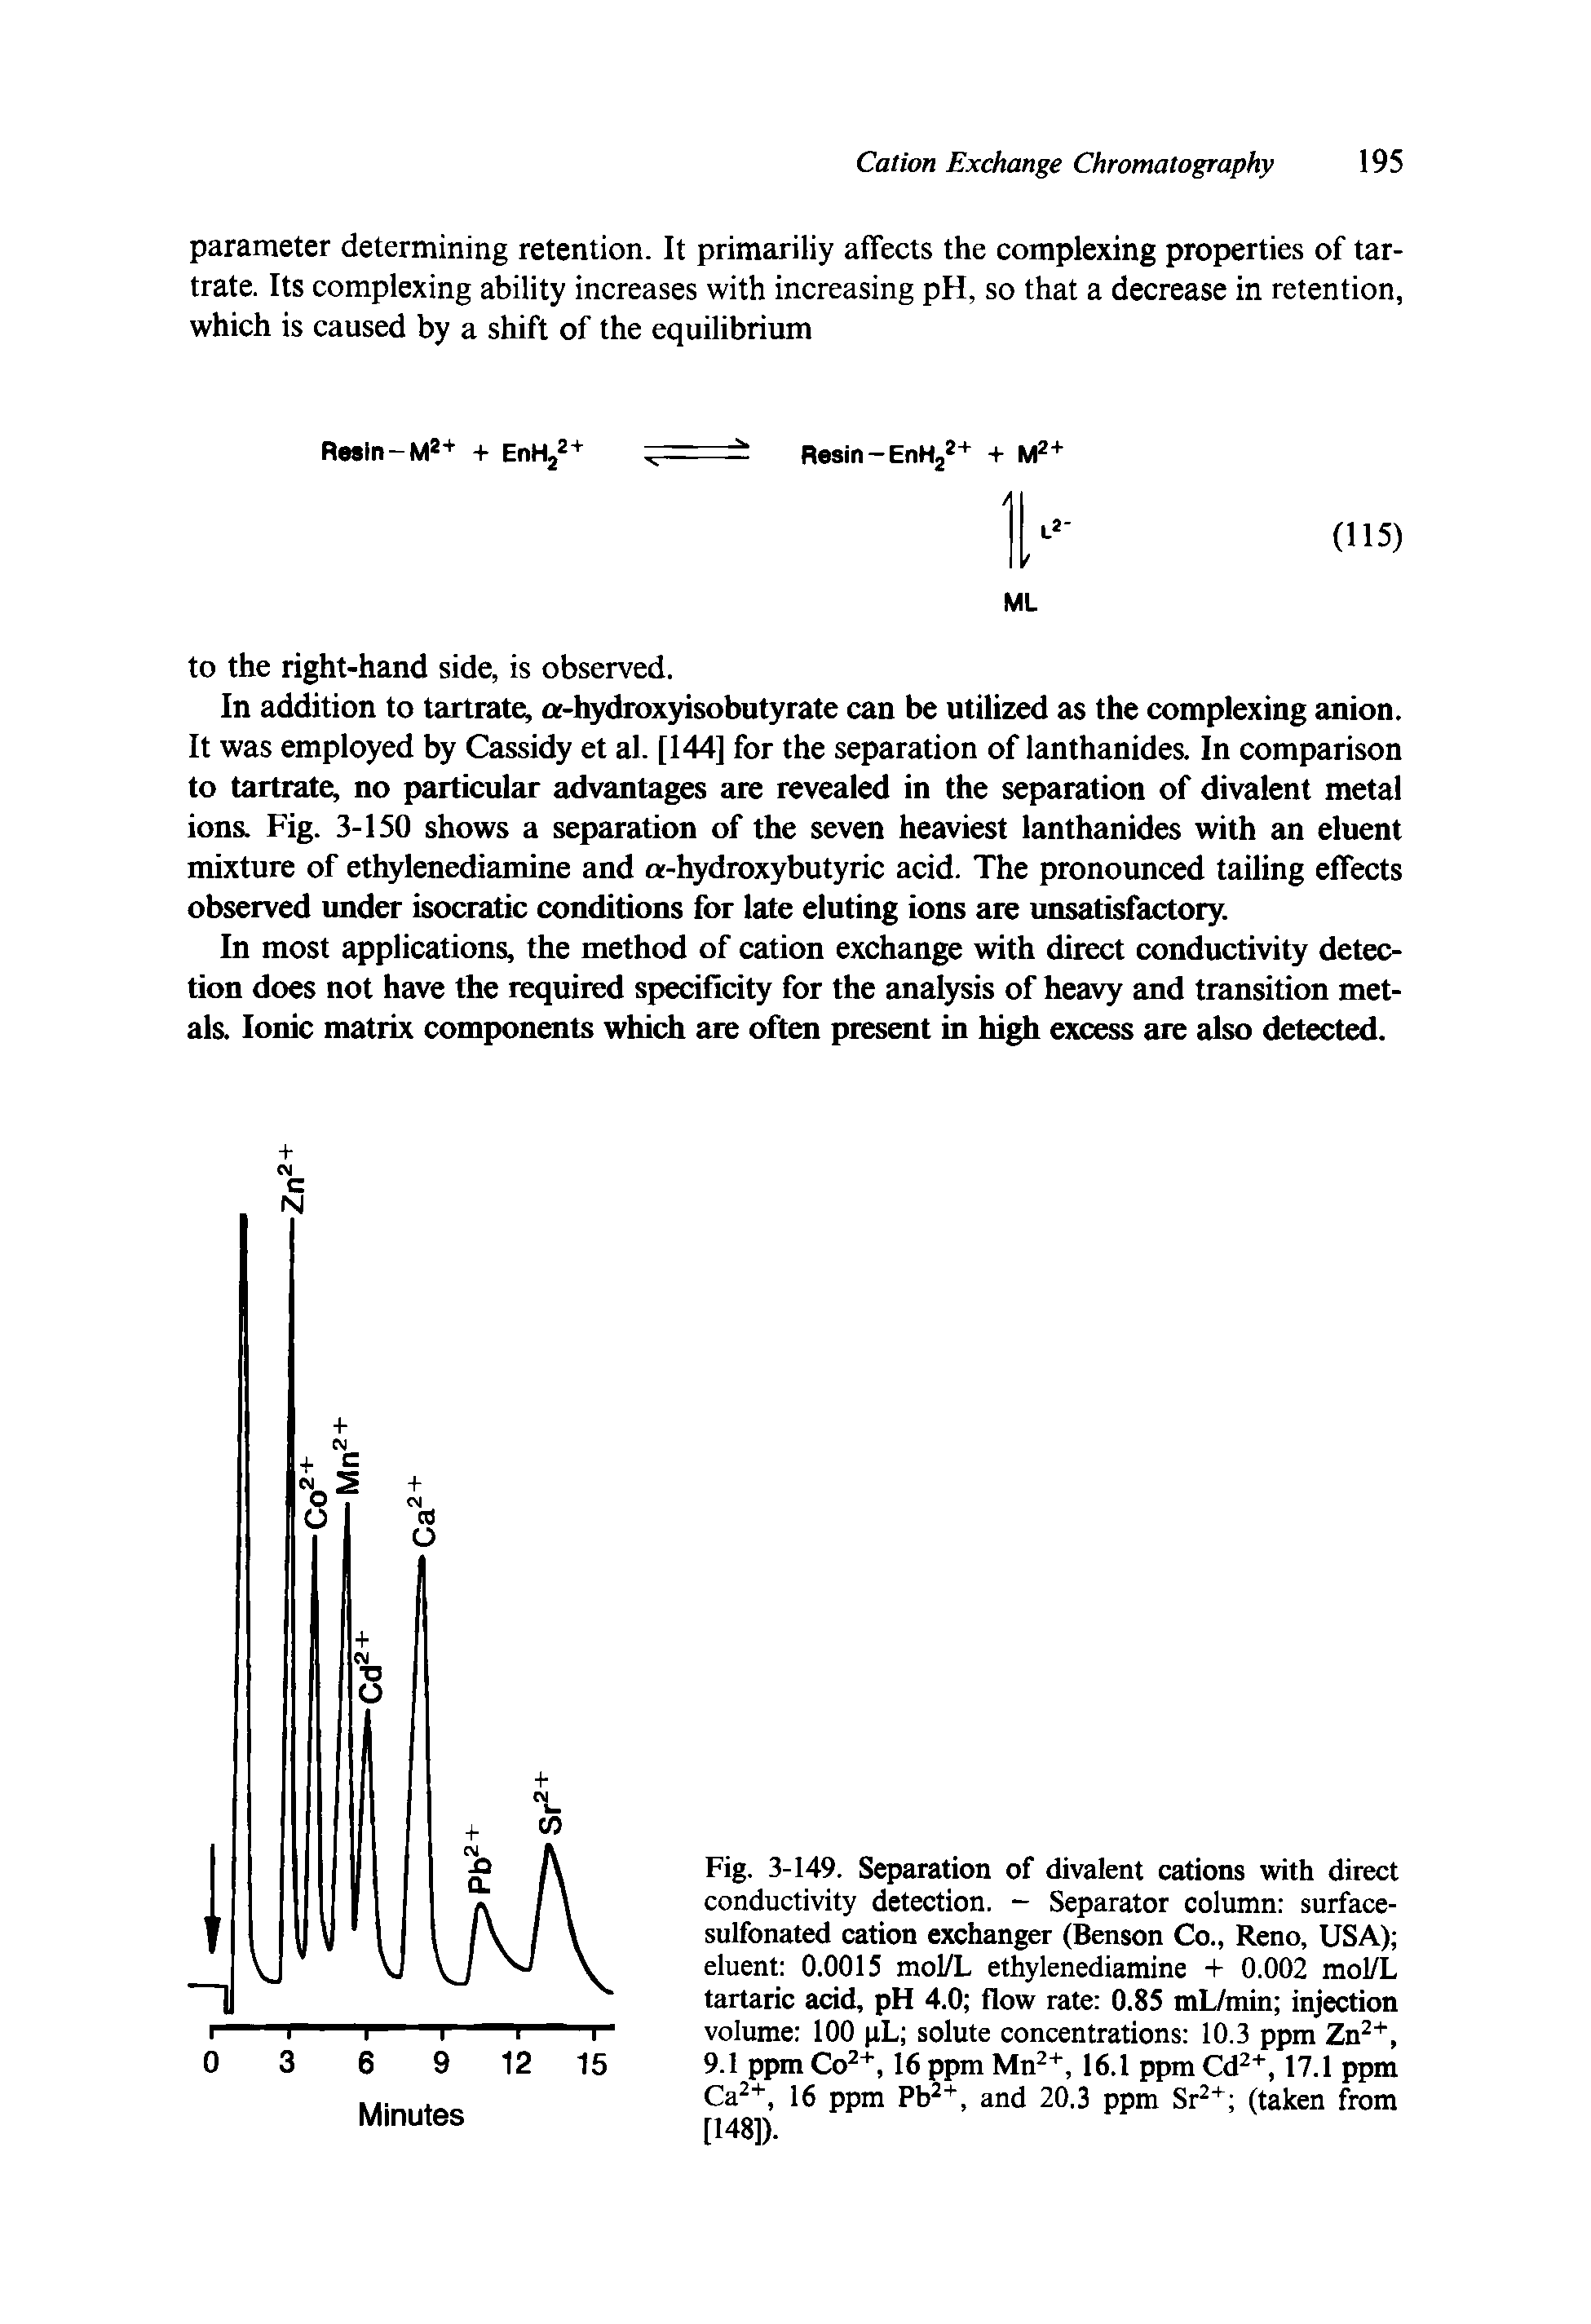 Fig. 3-149. Separation of divalent cations with direct conductivity detection. - Separator column surface-sulfonated cation exchanger (Benson Co., Reno, USA) eluent 0.0015 mol/L ethylenediamine + 0.002 mol/L tartaric acid, pH 4.0 flow rate 0.85 mL/min injection volume 100 pL solute concentrations 10.3 ppm Zn2+, 9.1 ppm Co2+, 16 ppm Mn2+, 16.1 ppm Cd2+, 17.1 ppm Ca2+, 16 ppm Pb2+, and 20.3 ppm Sr2+ (taken from [148]).